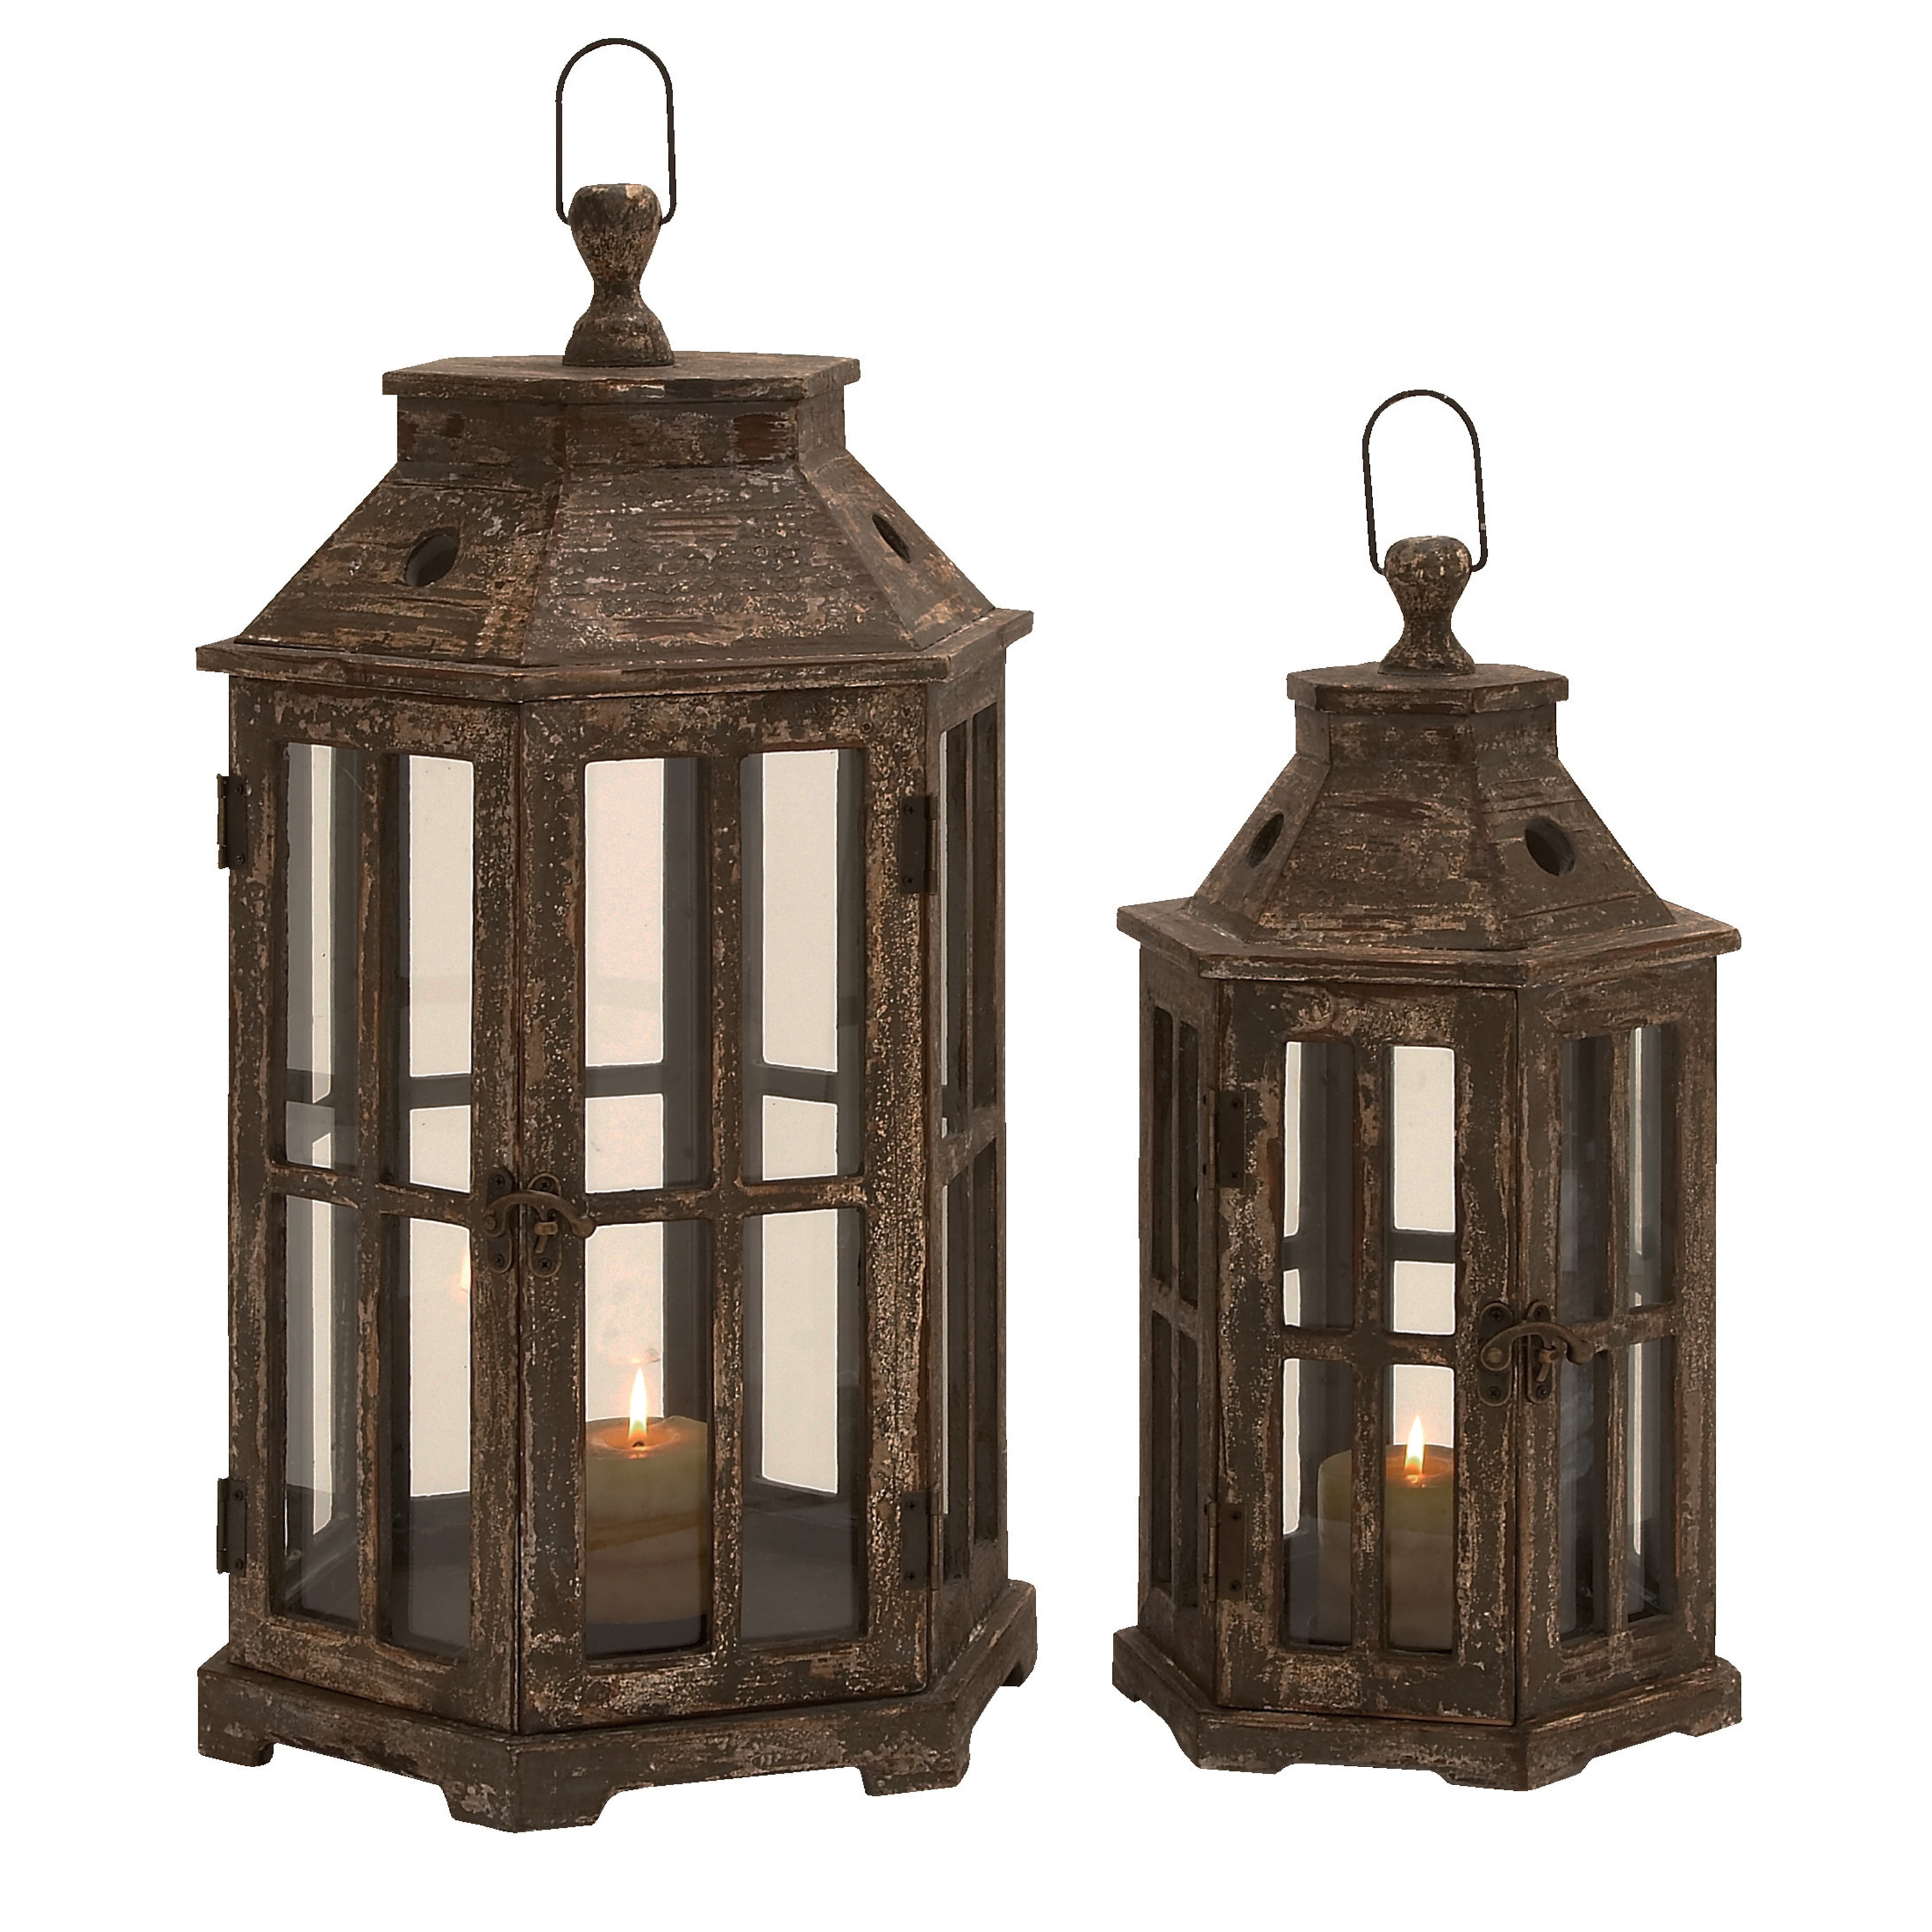 San Francisco Weathered Wood Hexagonal Lantern Set of 2 (BrownCare Wipe with a soft dry clothVented topsHandles for transportingLanterns have hinged doorsEach holds candlesticks or pillar candles (not included)Dimensions 24.5 inches high x 12 inches wid